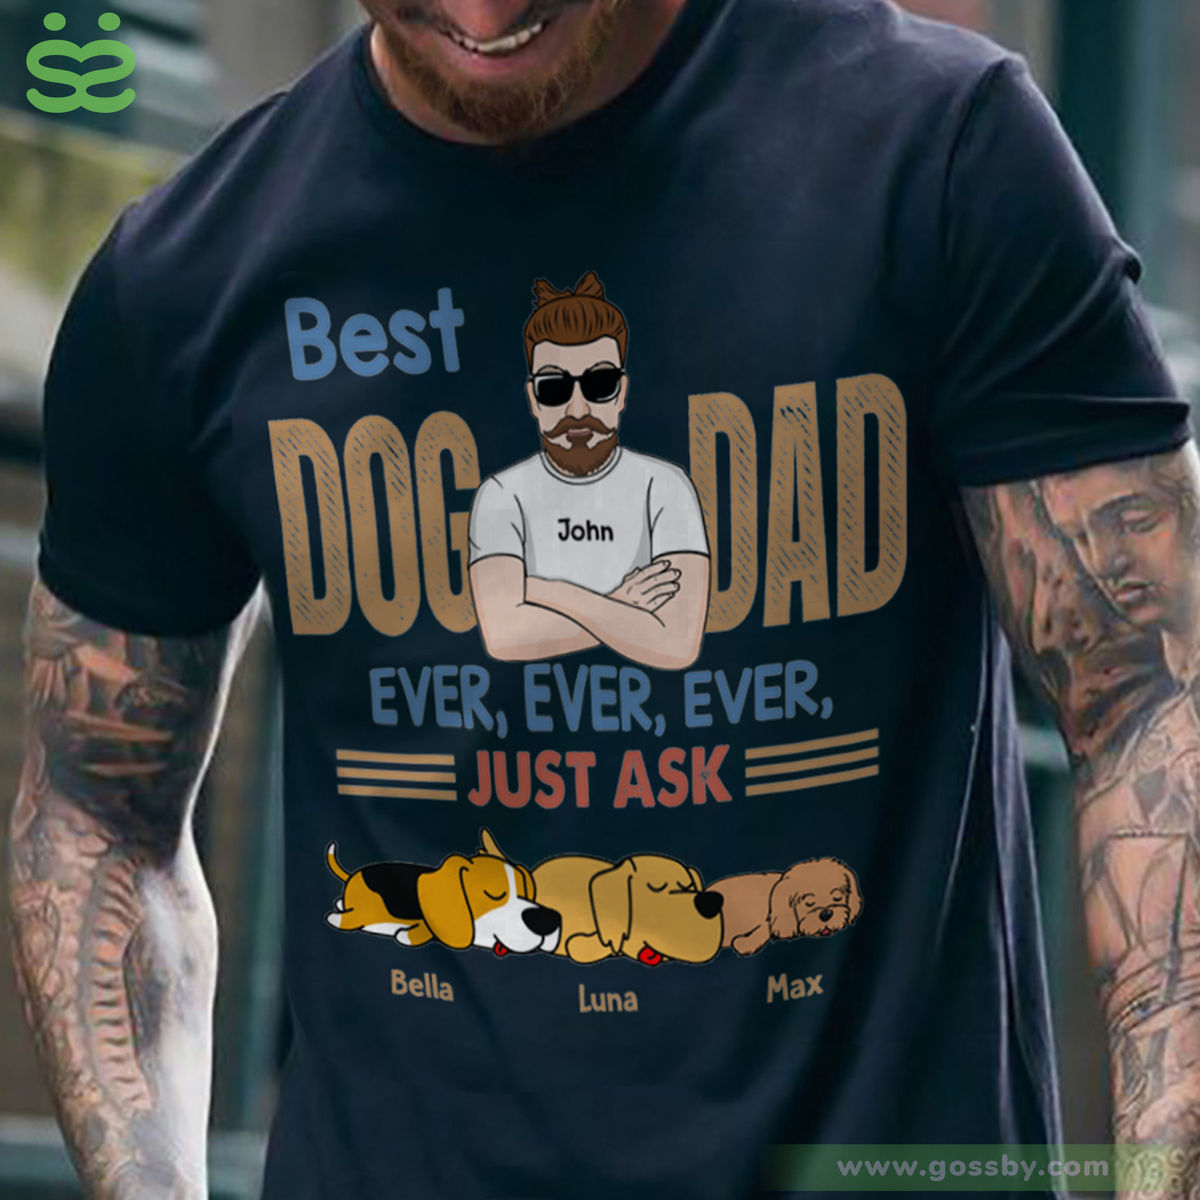 Personalized Shirt - Dog funny - Best Dog Dad Ever Ever Ever Just Ask_1